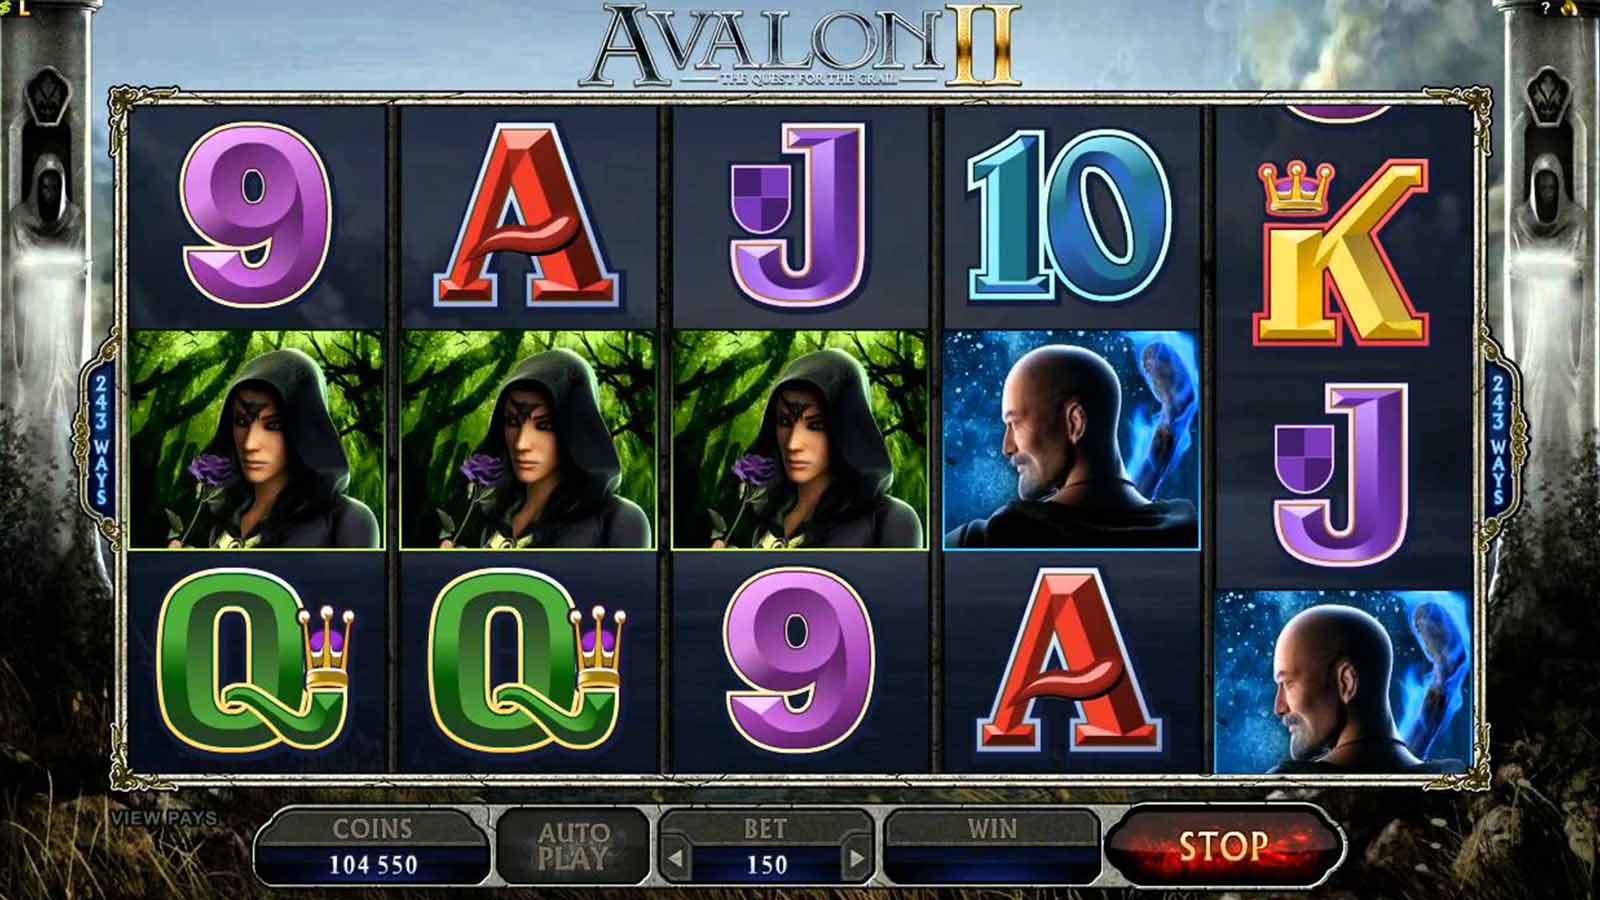 Avalon II The Quest for the Grail